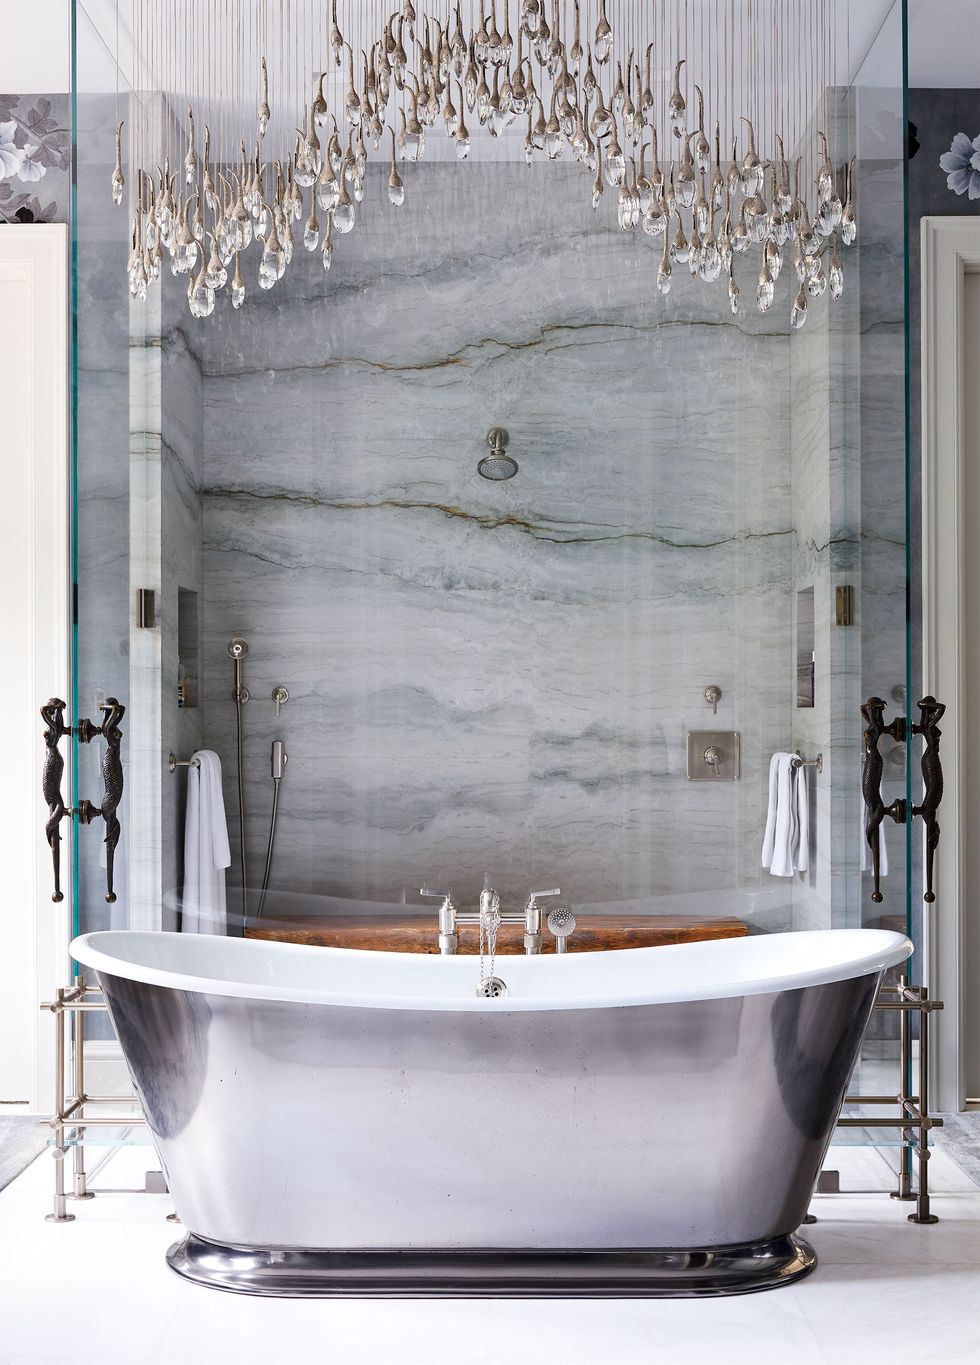 40 Sophisticated Walk-in Shower Ideas That Are Practically Dripping Glamour